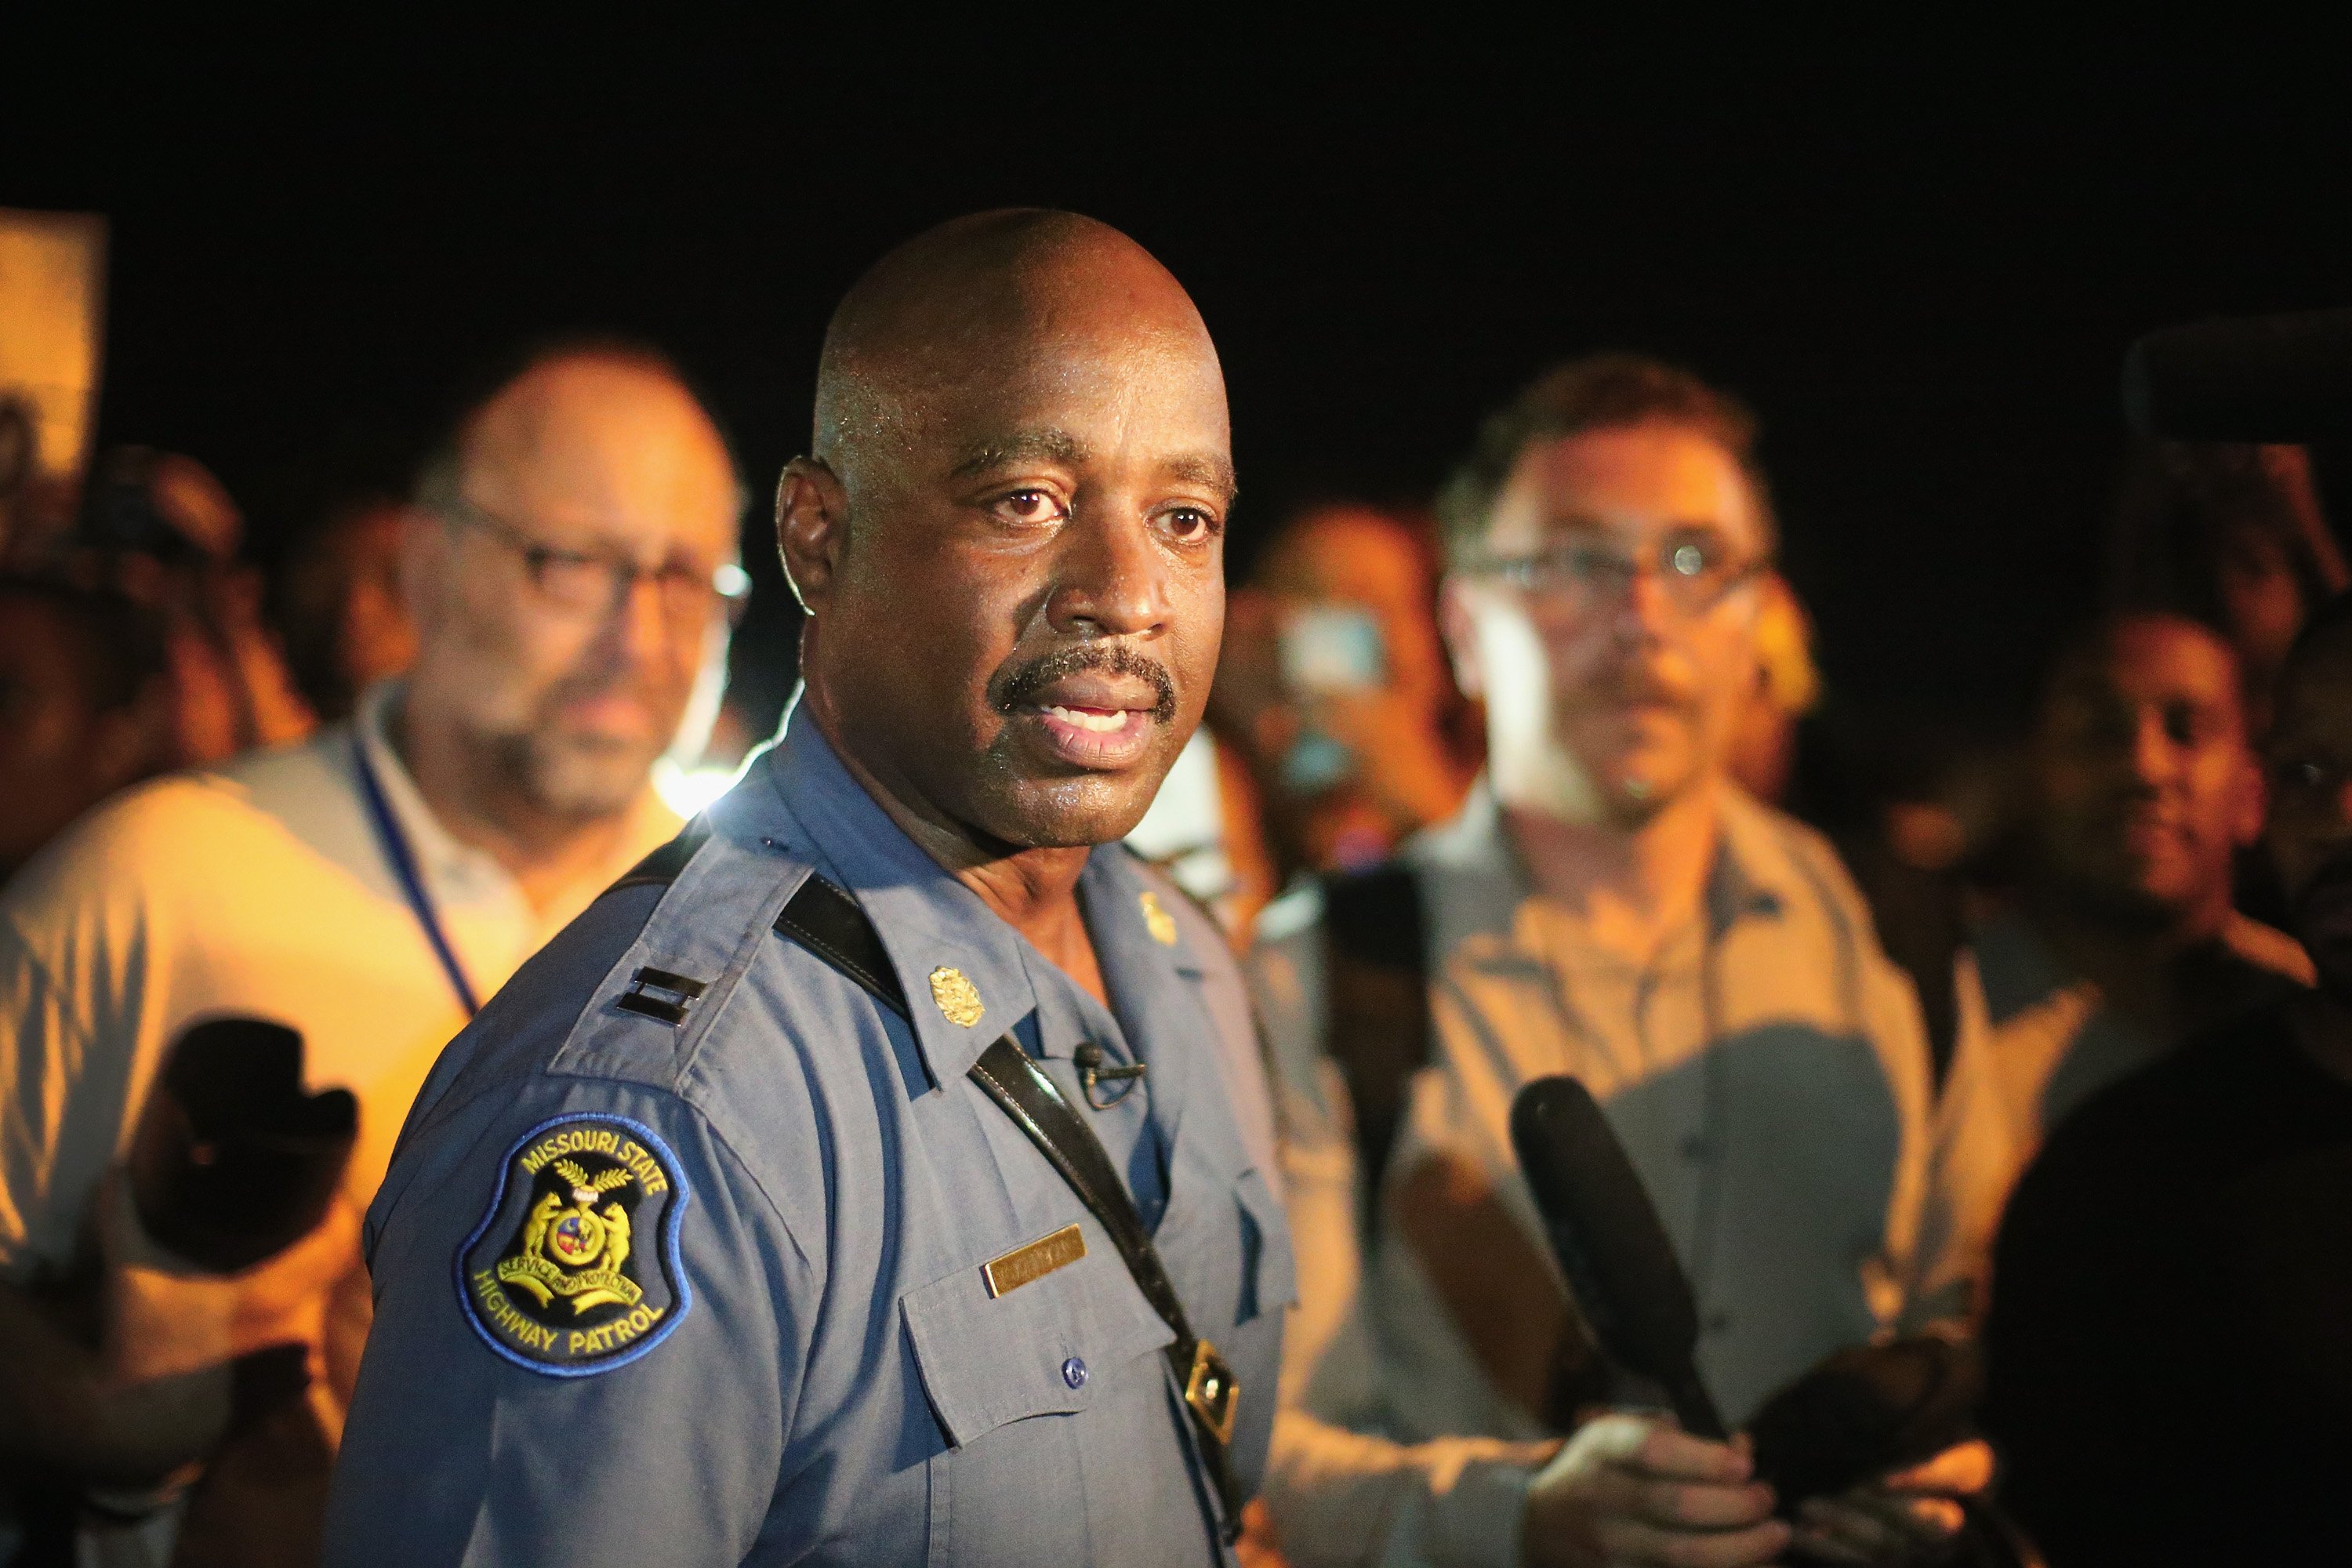 Capt. Ronald Johnson of the Missouri State Highway Patrol, who was appointed by the governor to take control of security operations in the city of Ferguson, walks among demonstrators gathered along West Florissant Avenue on August 14, 2014 in Ferguson, Missouri. (Scott Olson—Getty Images)